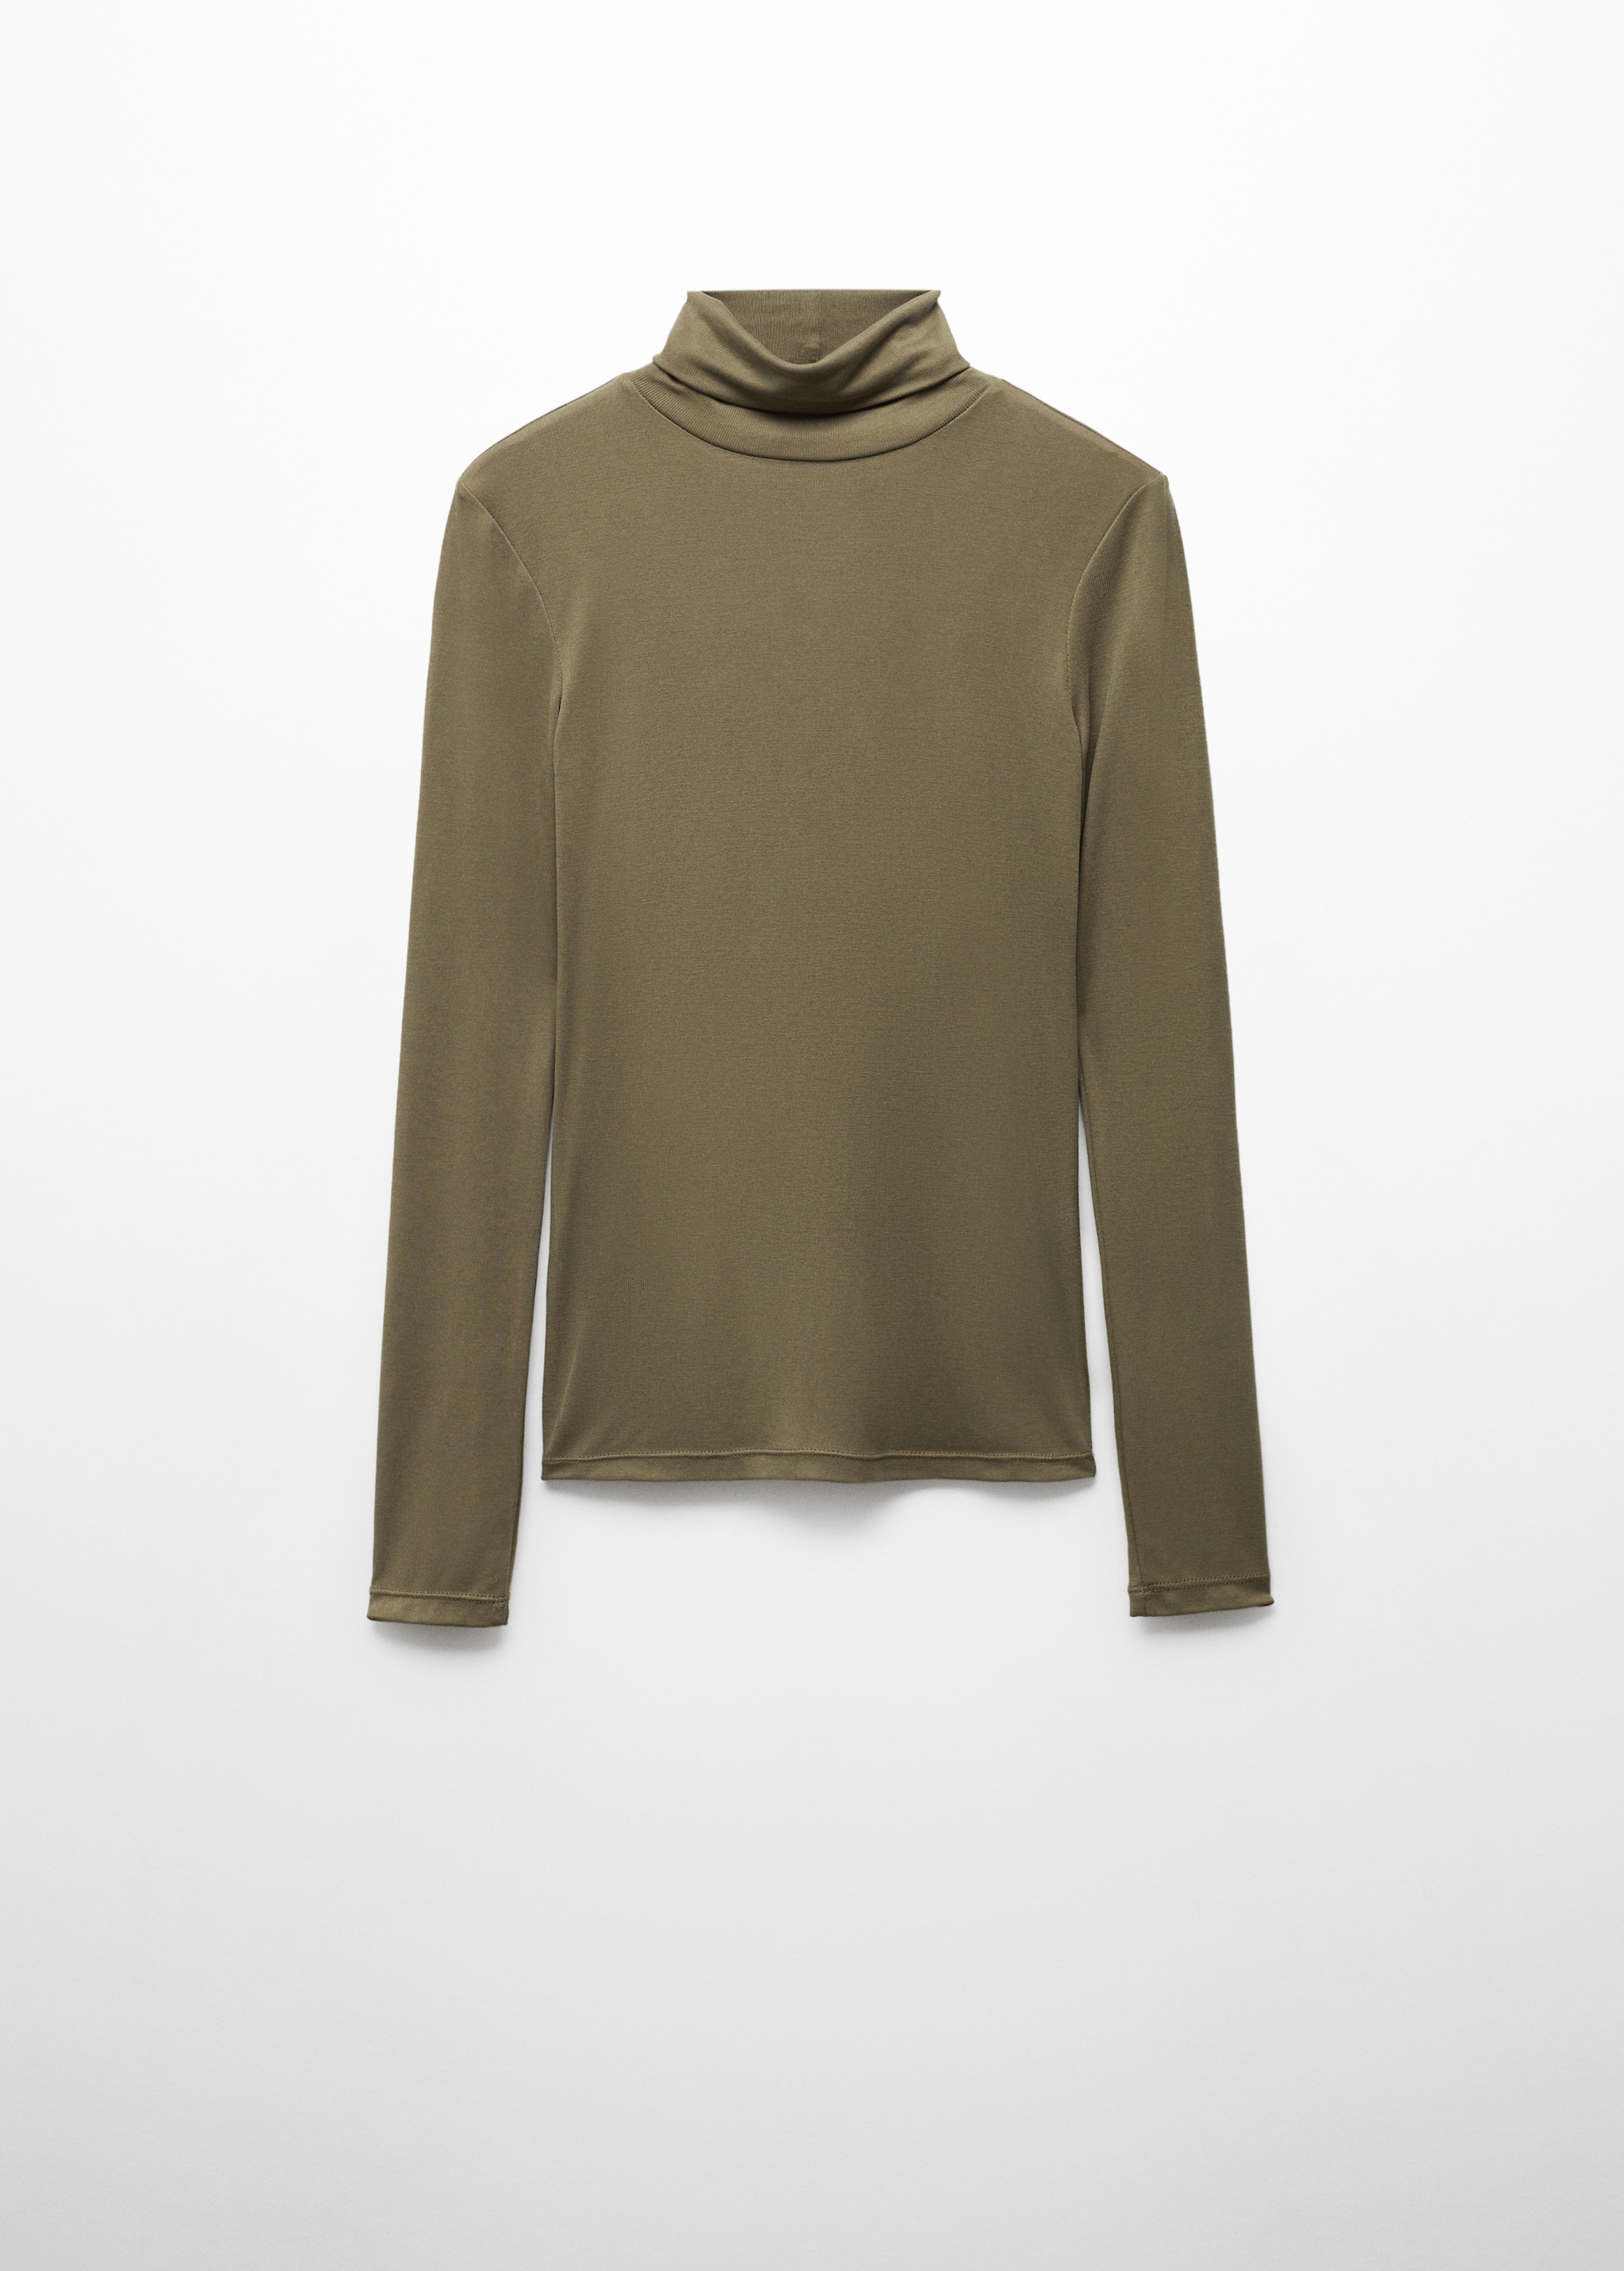 Modal turtleneck t-shirt - Article without model